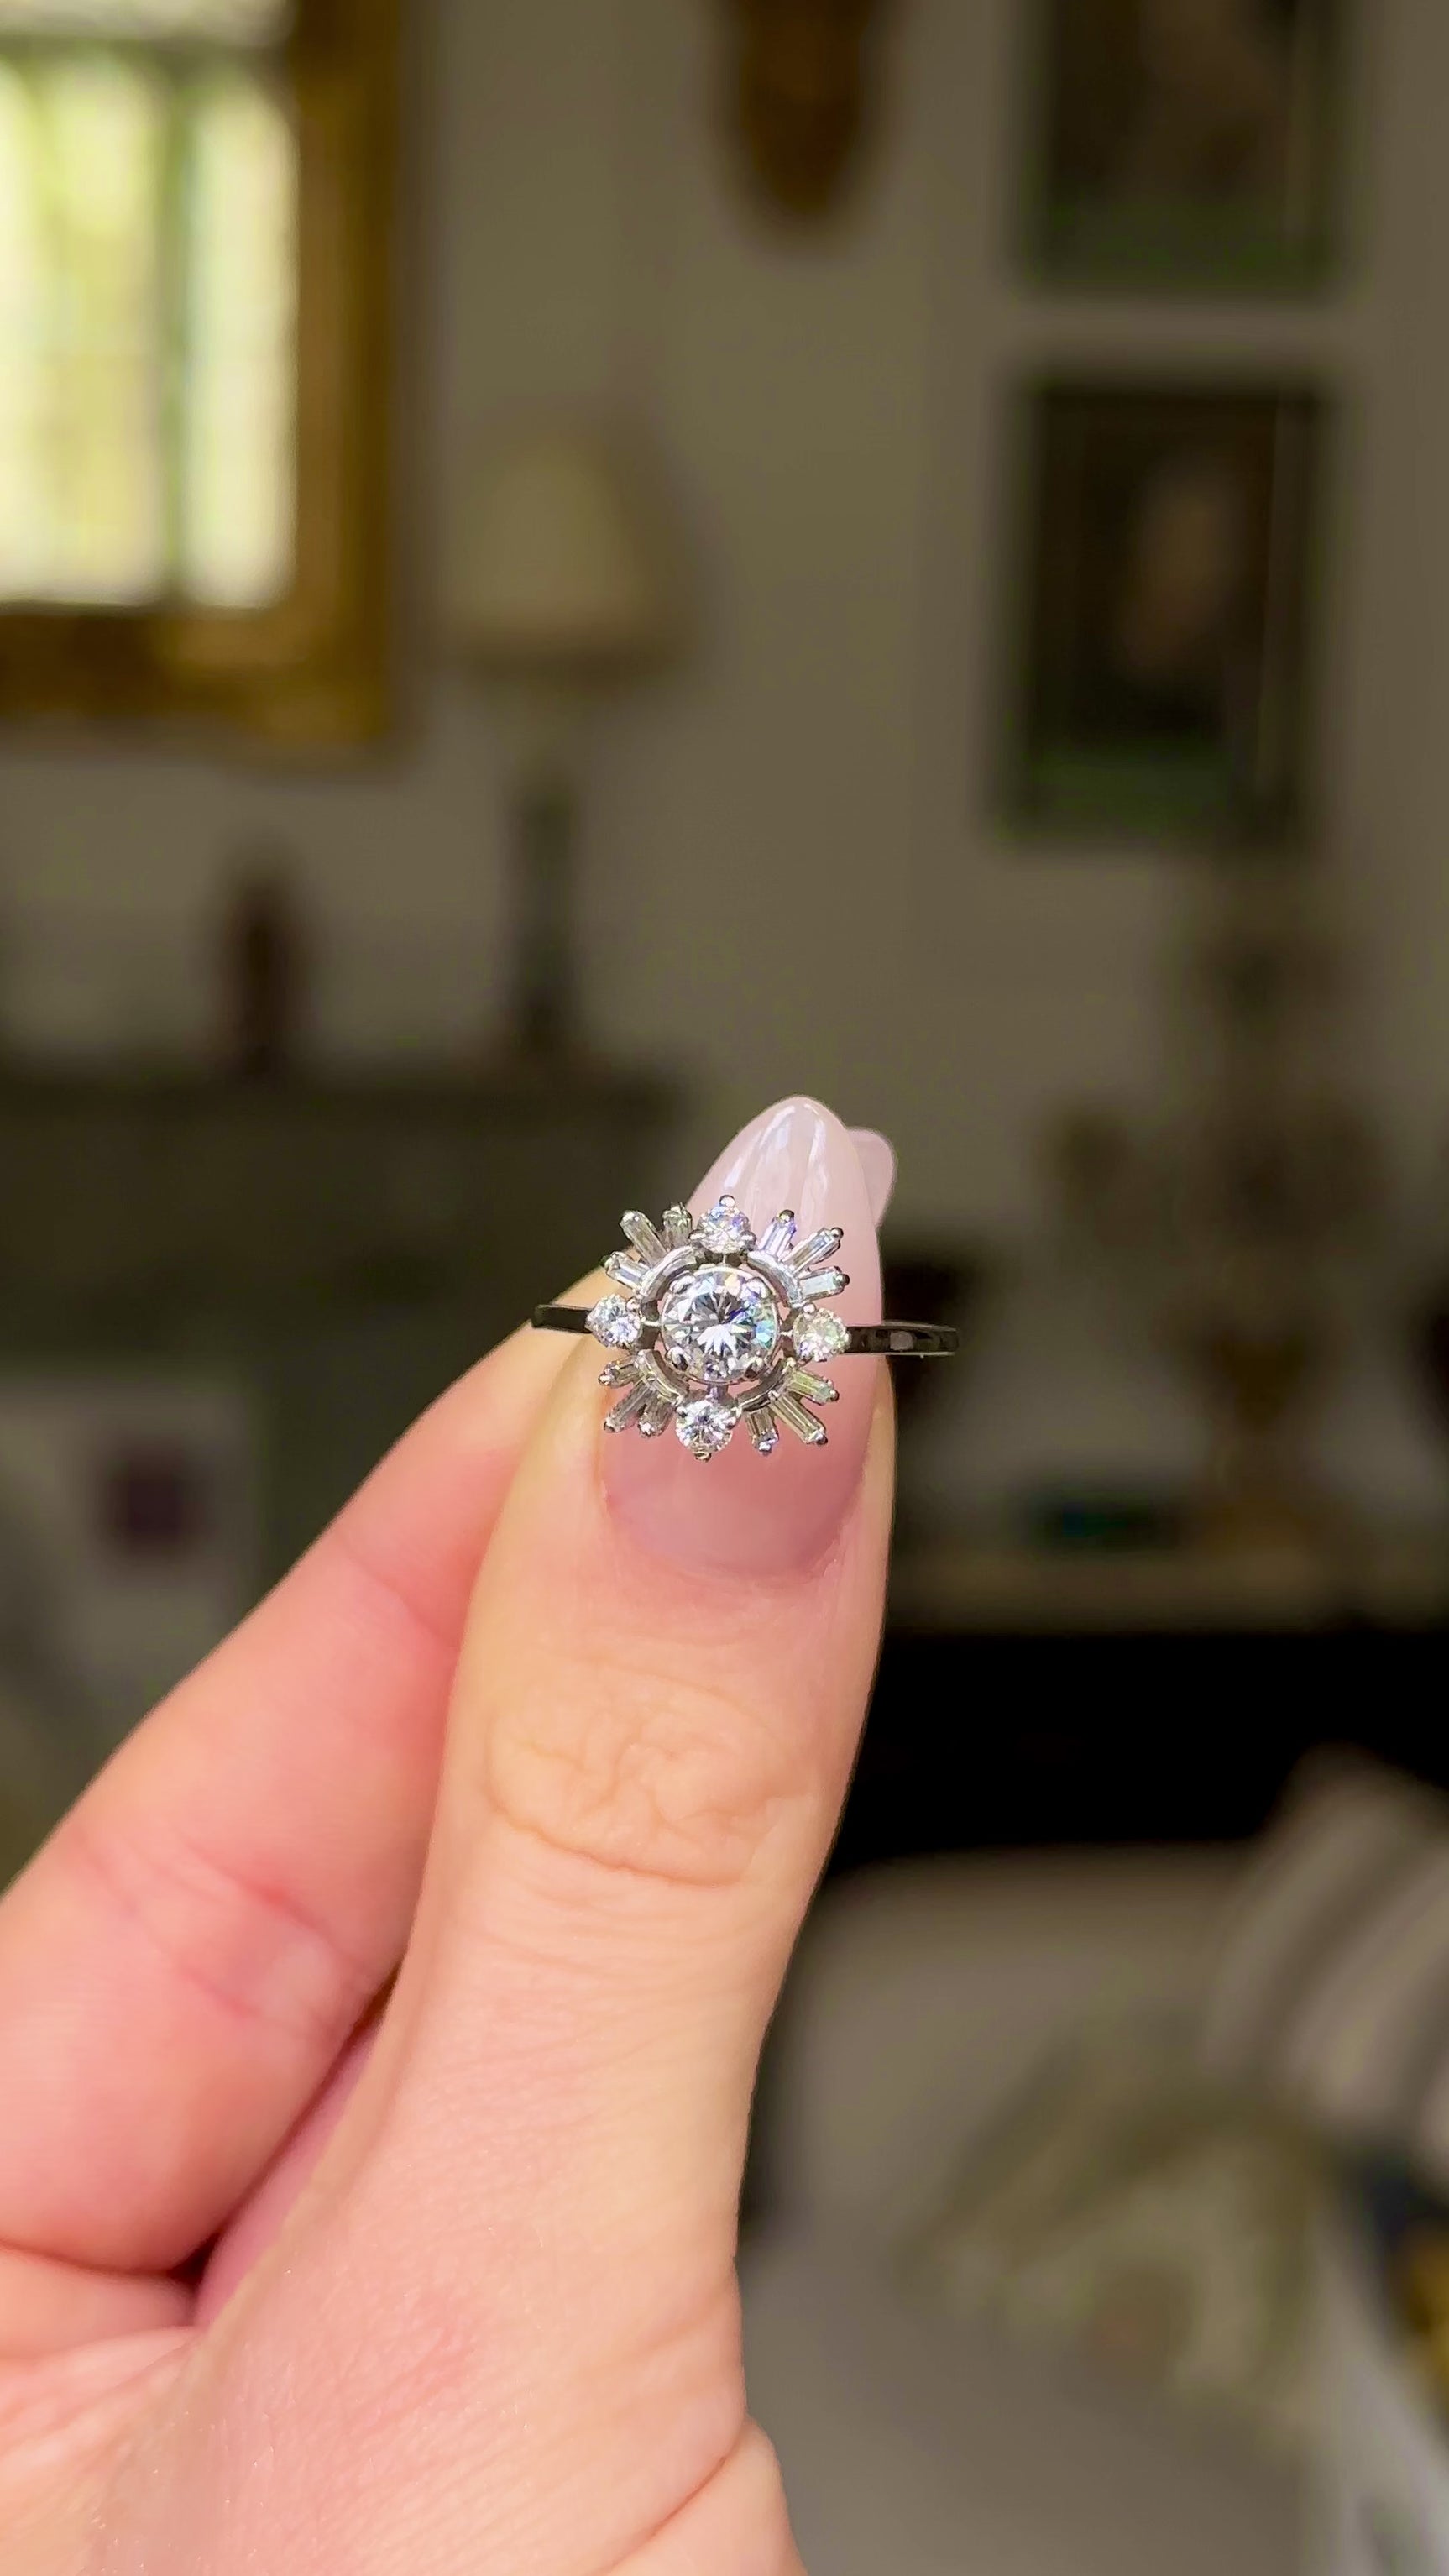 Vintage diamond cluster ring, held in fingers and moved around to give perspective.